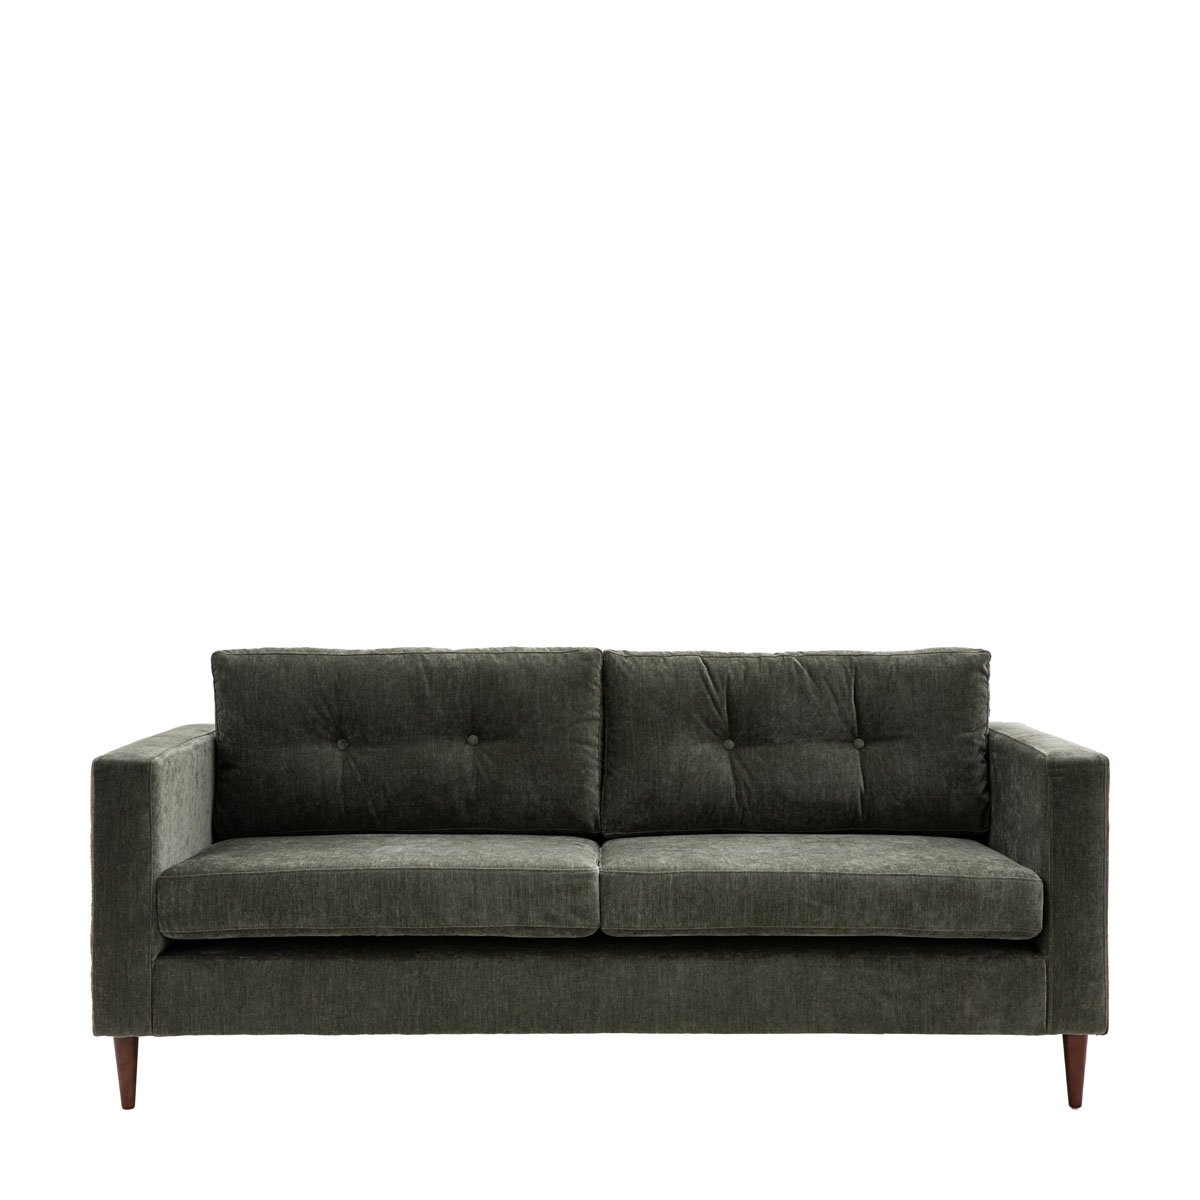 Whitwell Sofa 3 Seater Forest 1950x860x840mm